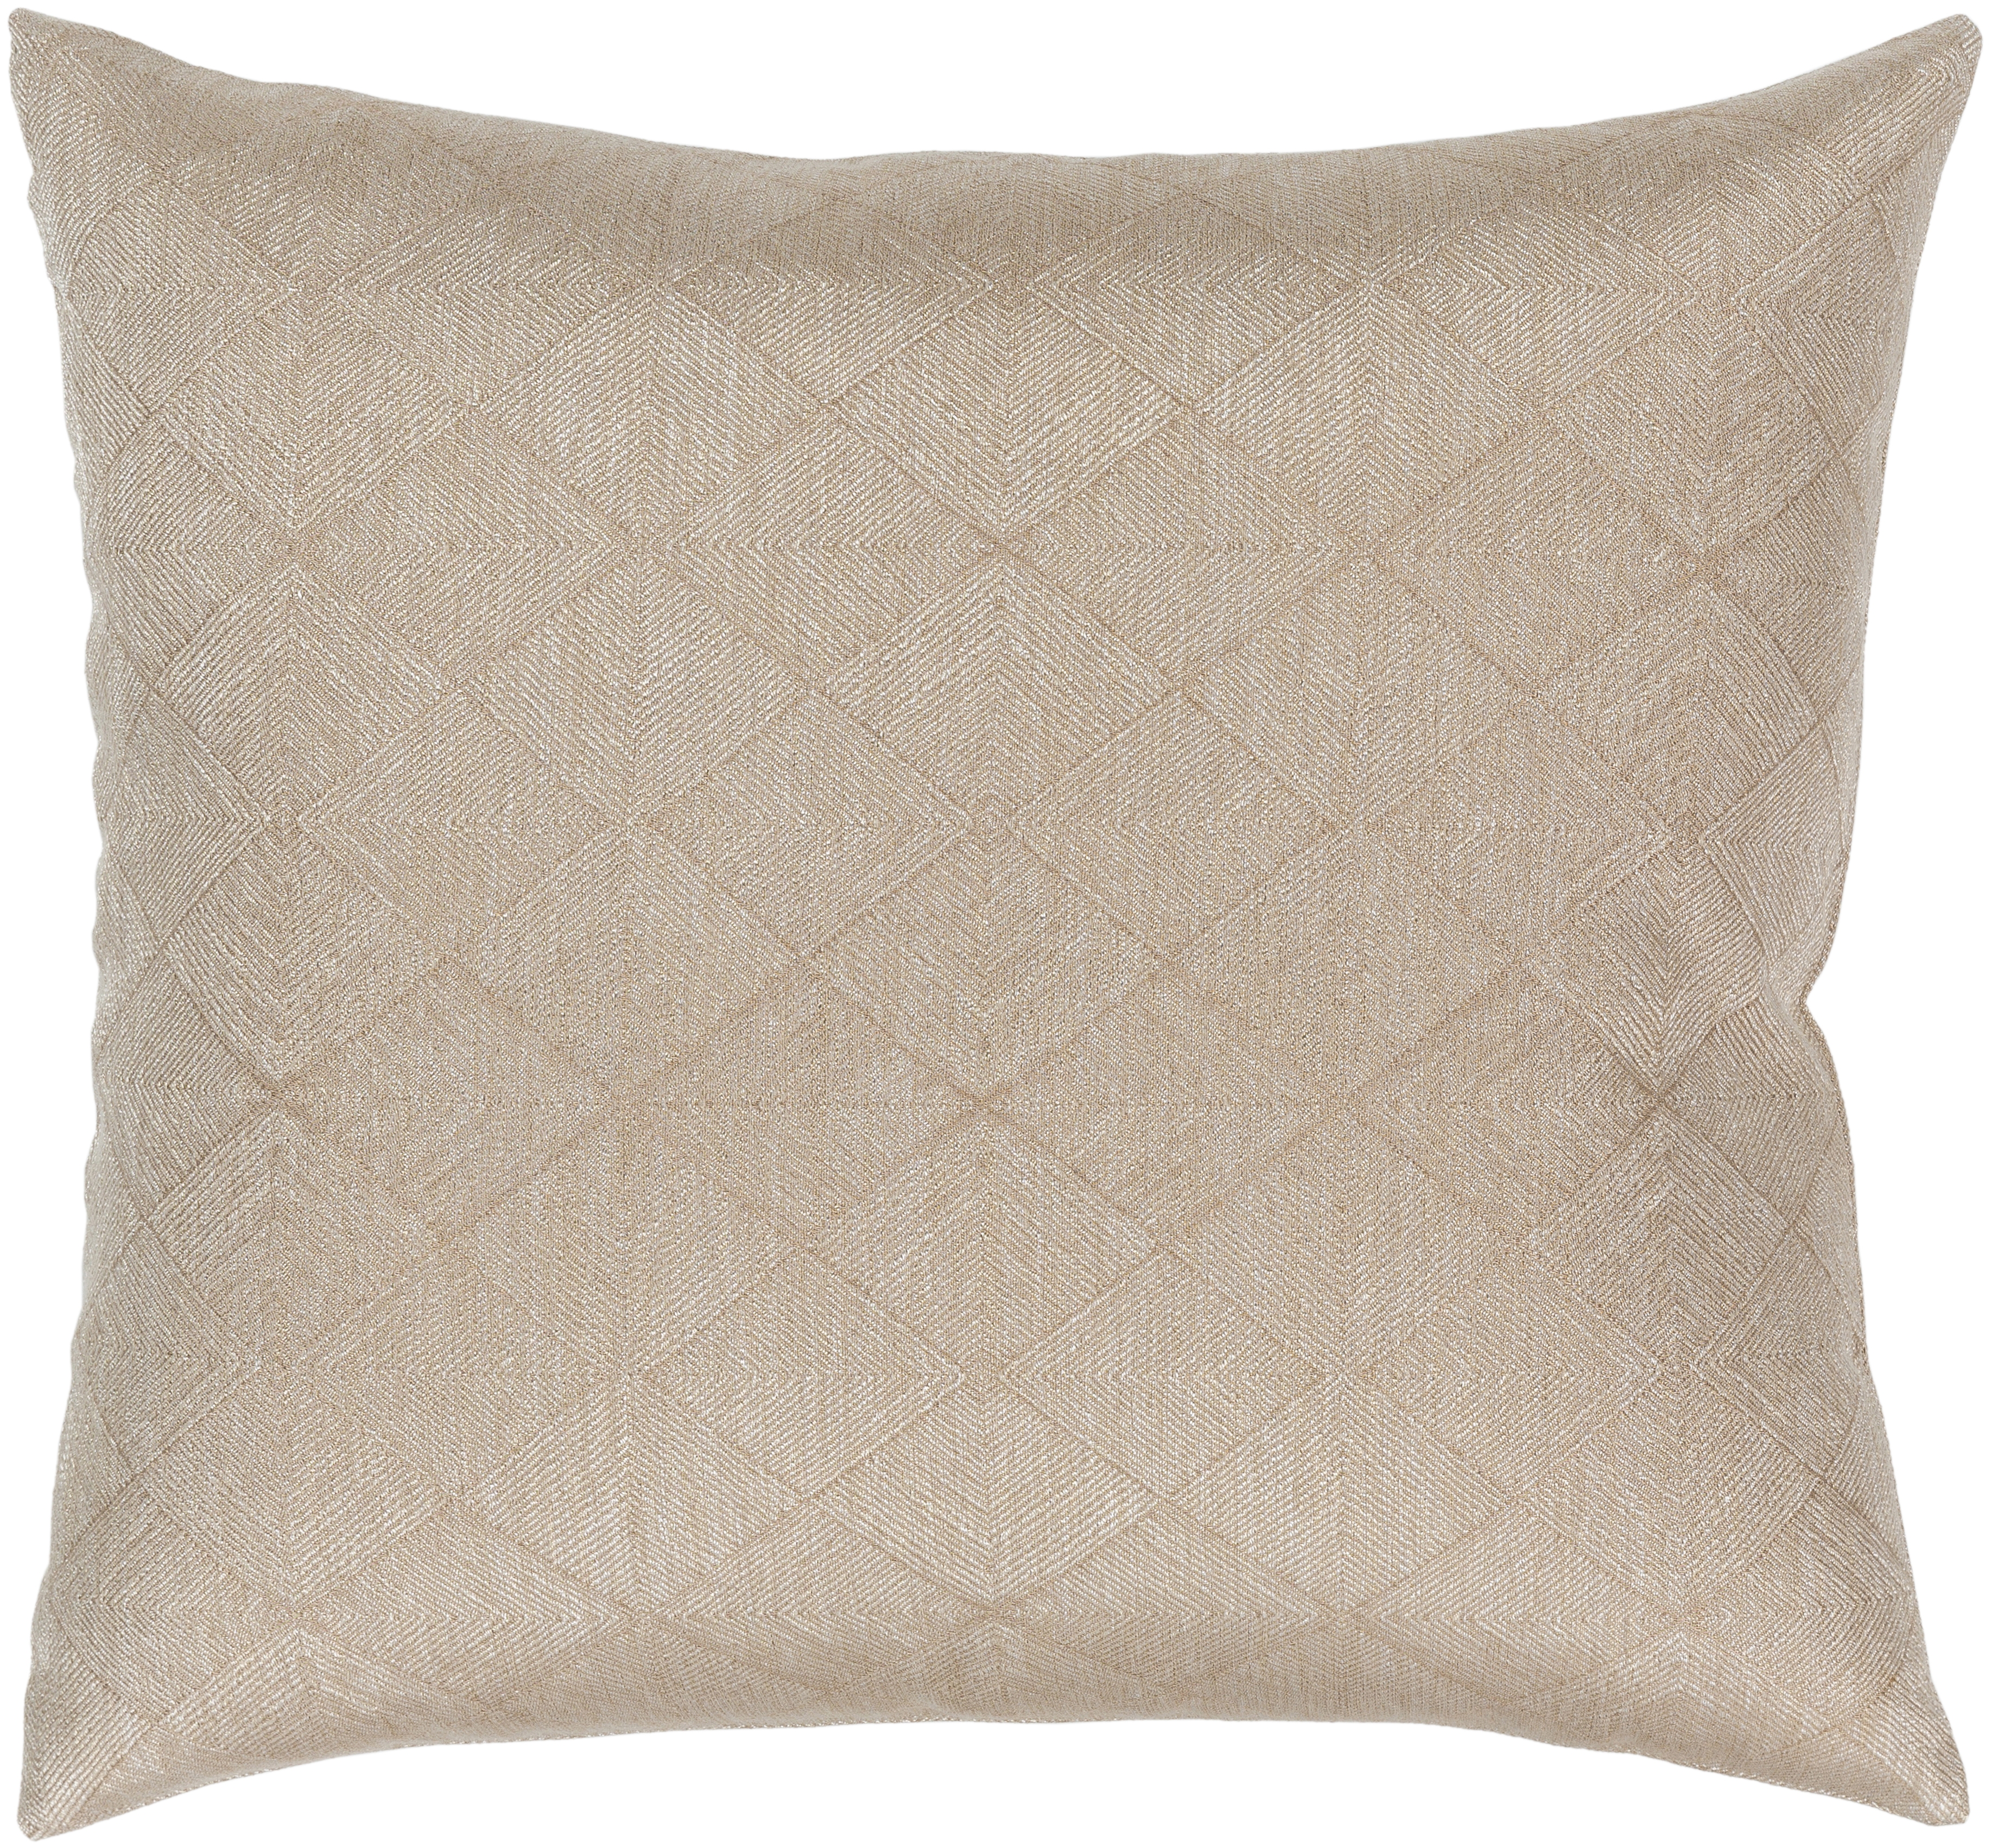 Messina Throw Pillow, 18" x 18", with down insert - Image 0